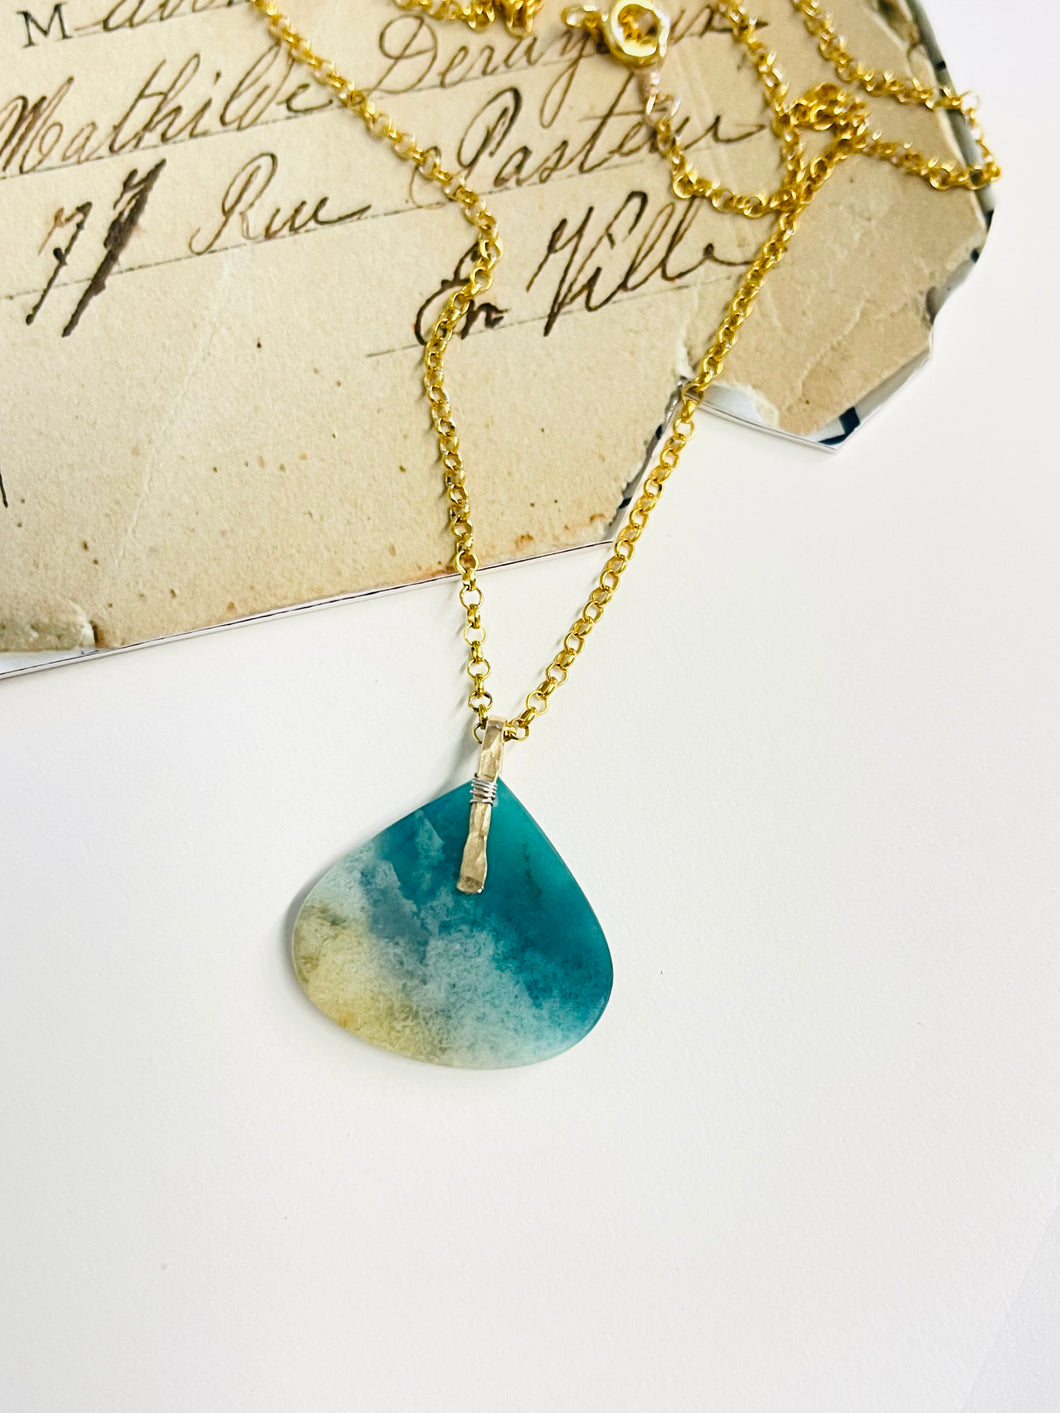 Pendant with Opalized wood